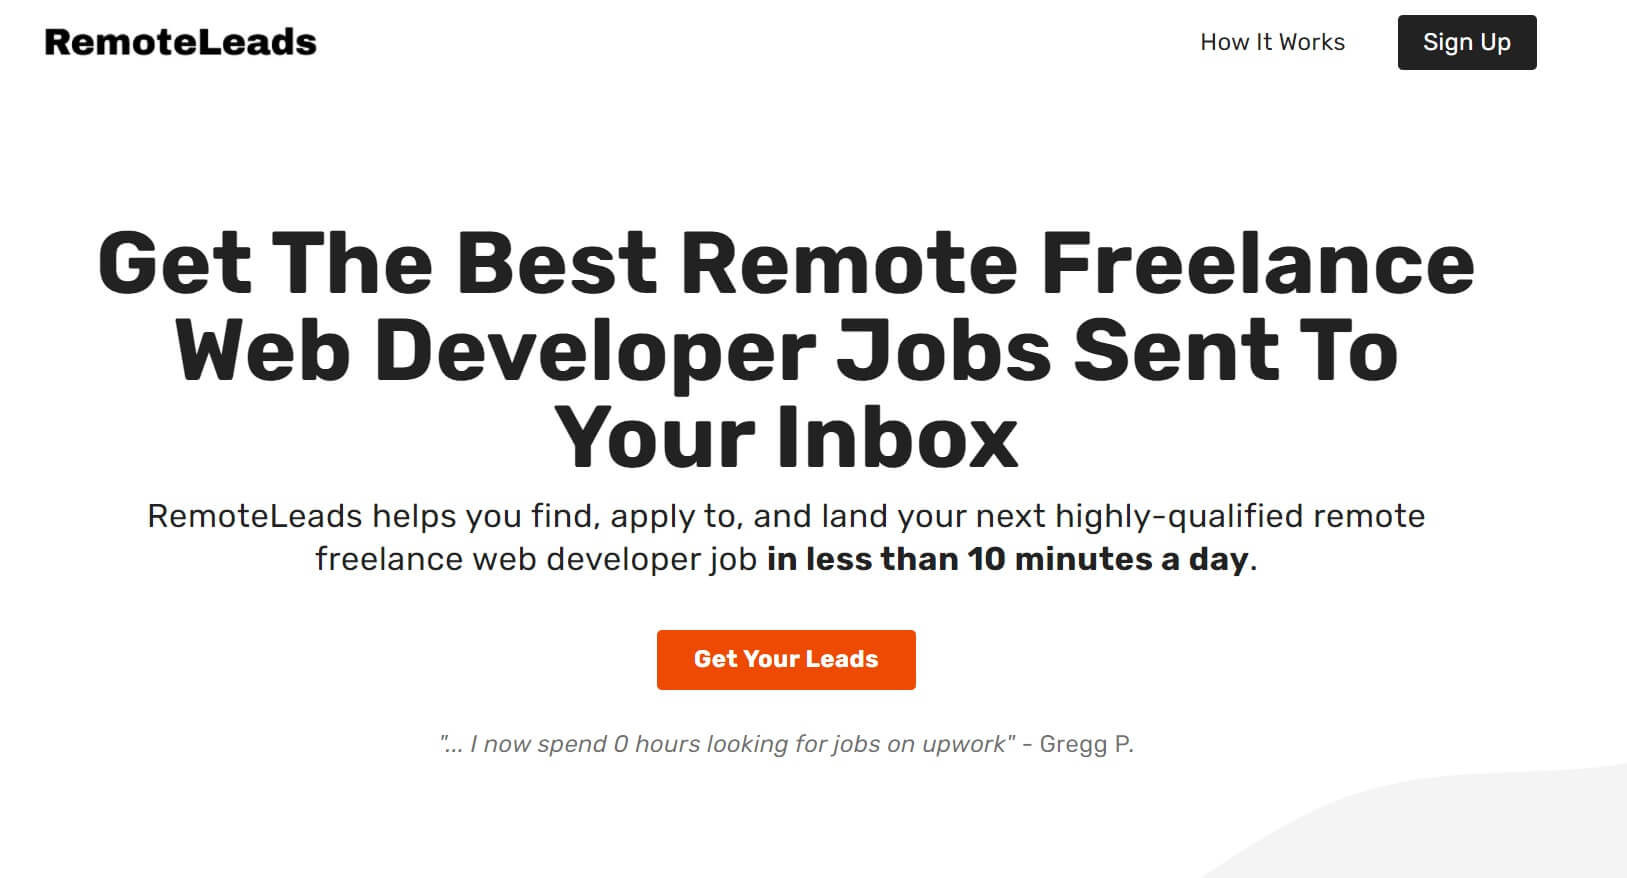 The RemoteLeads homepage